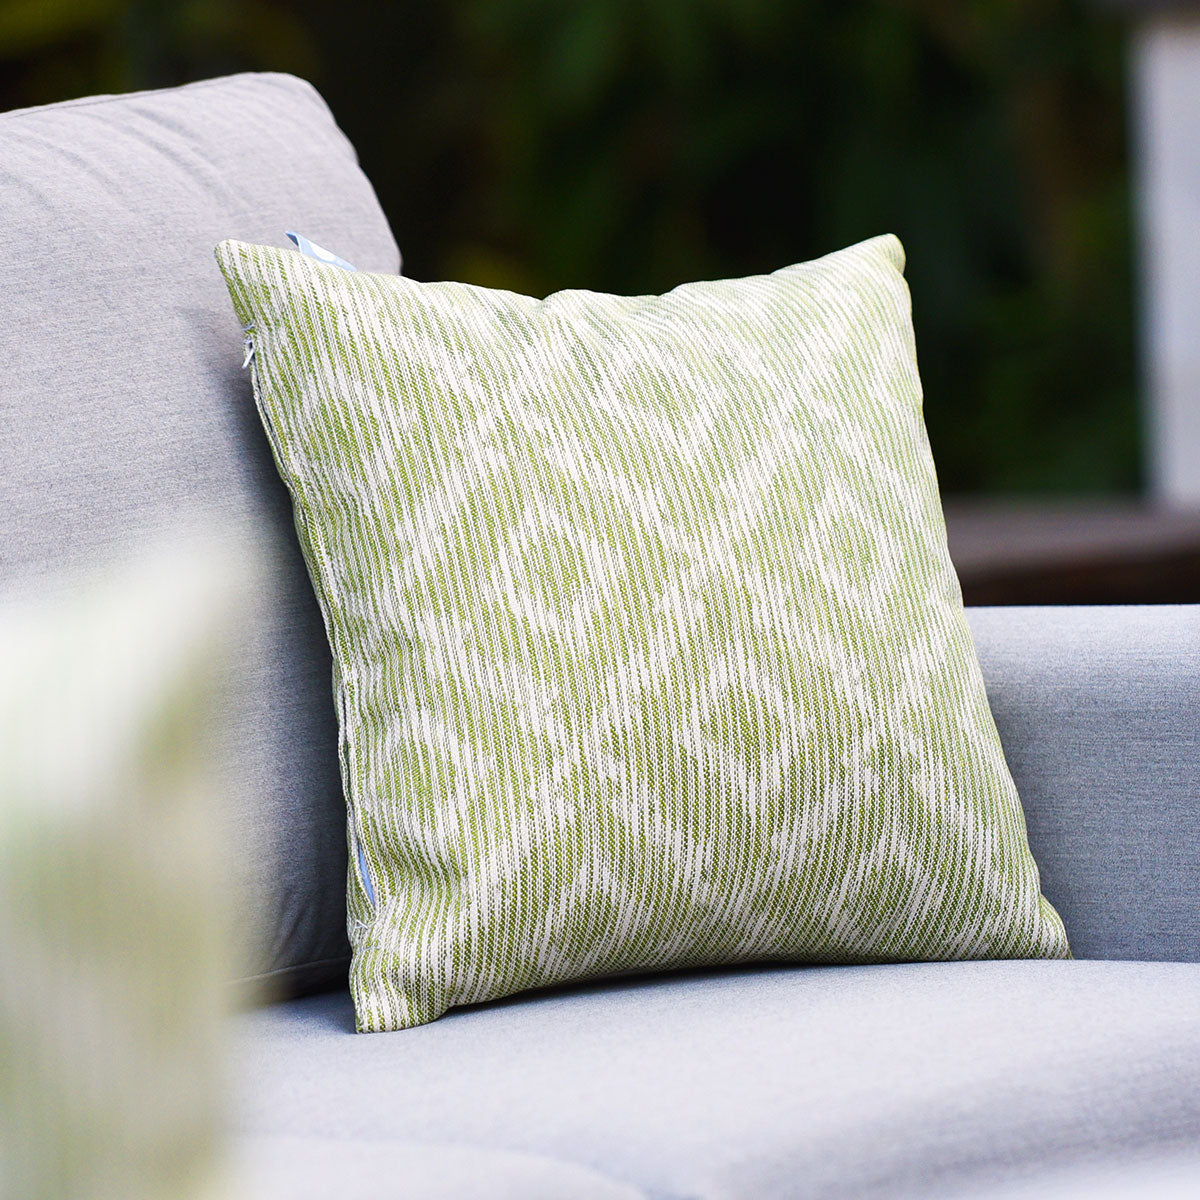 Pair of Outdoor Scatter Cushion - Santorini Green